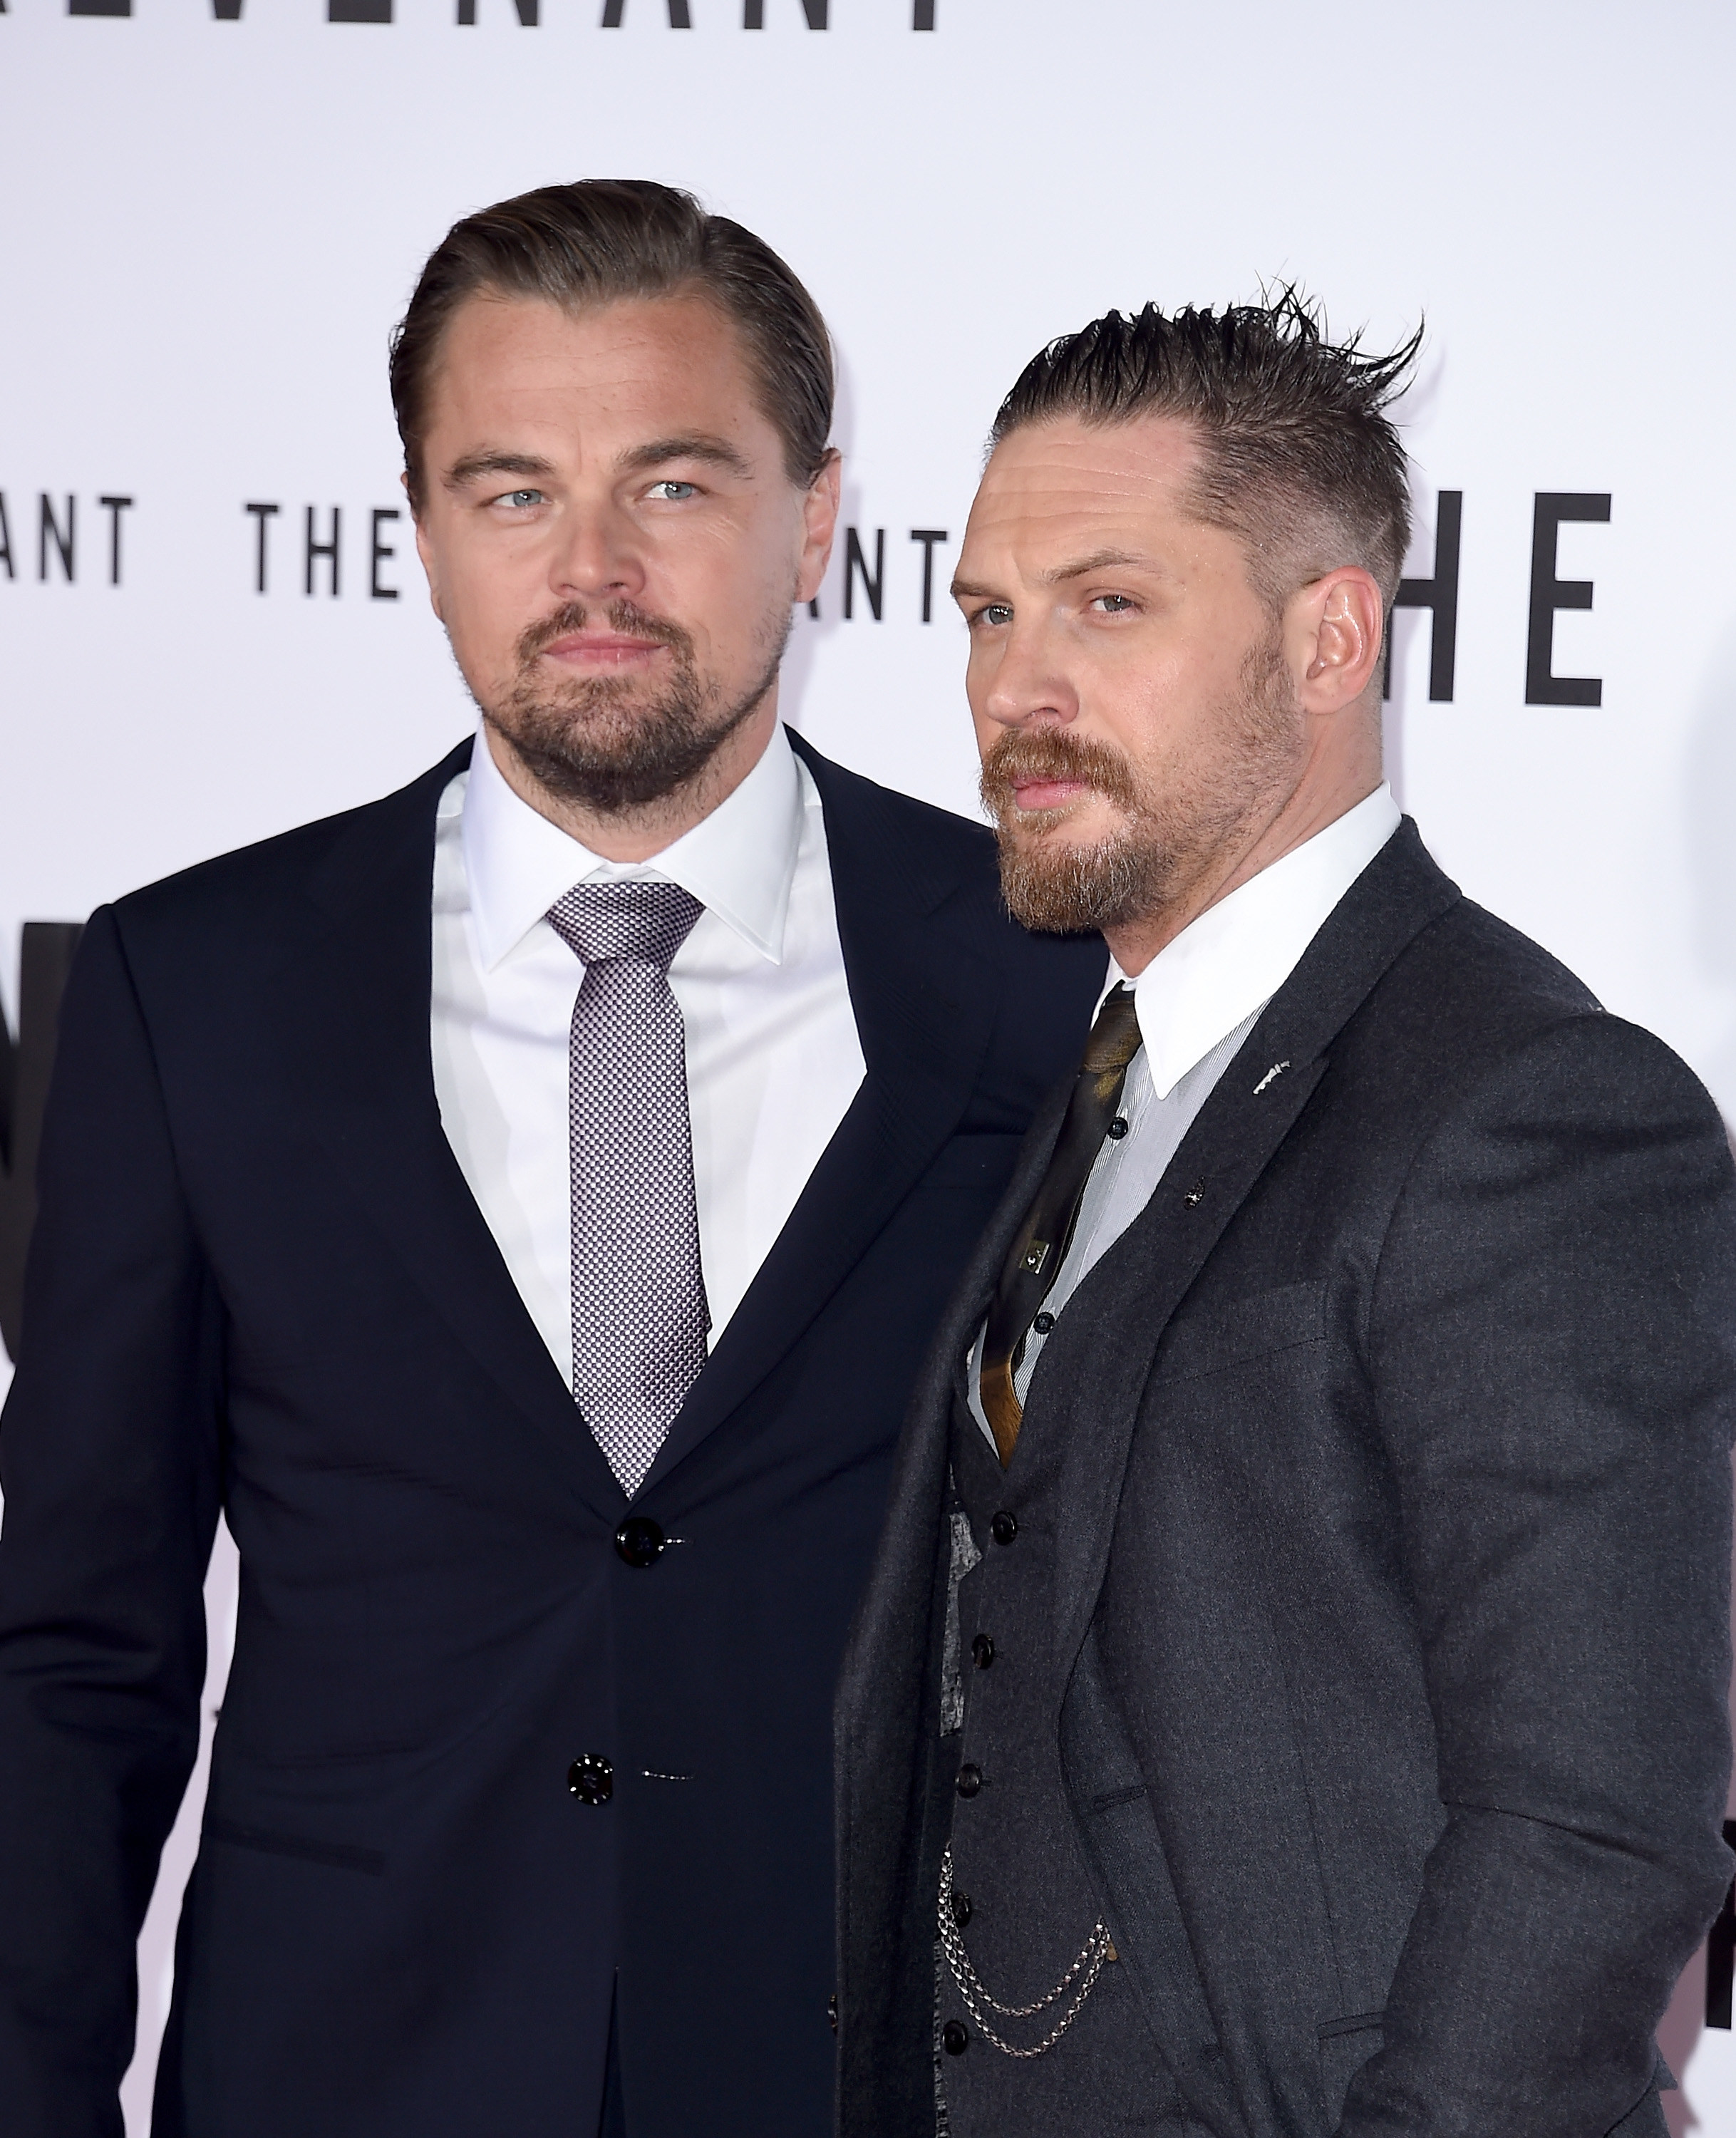 Leo DiCaprio and Tom Hardy standing together in suits and ties